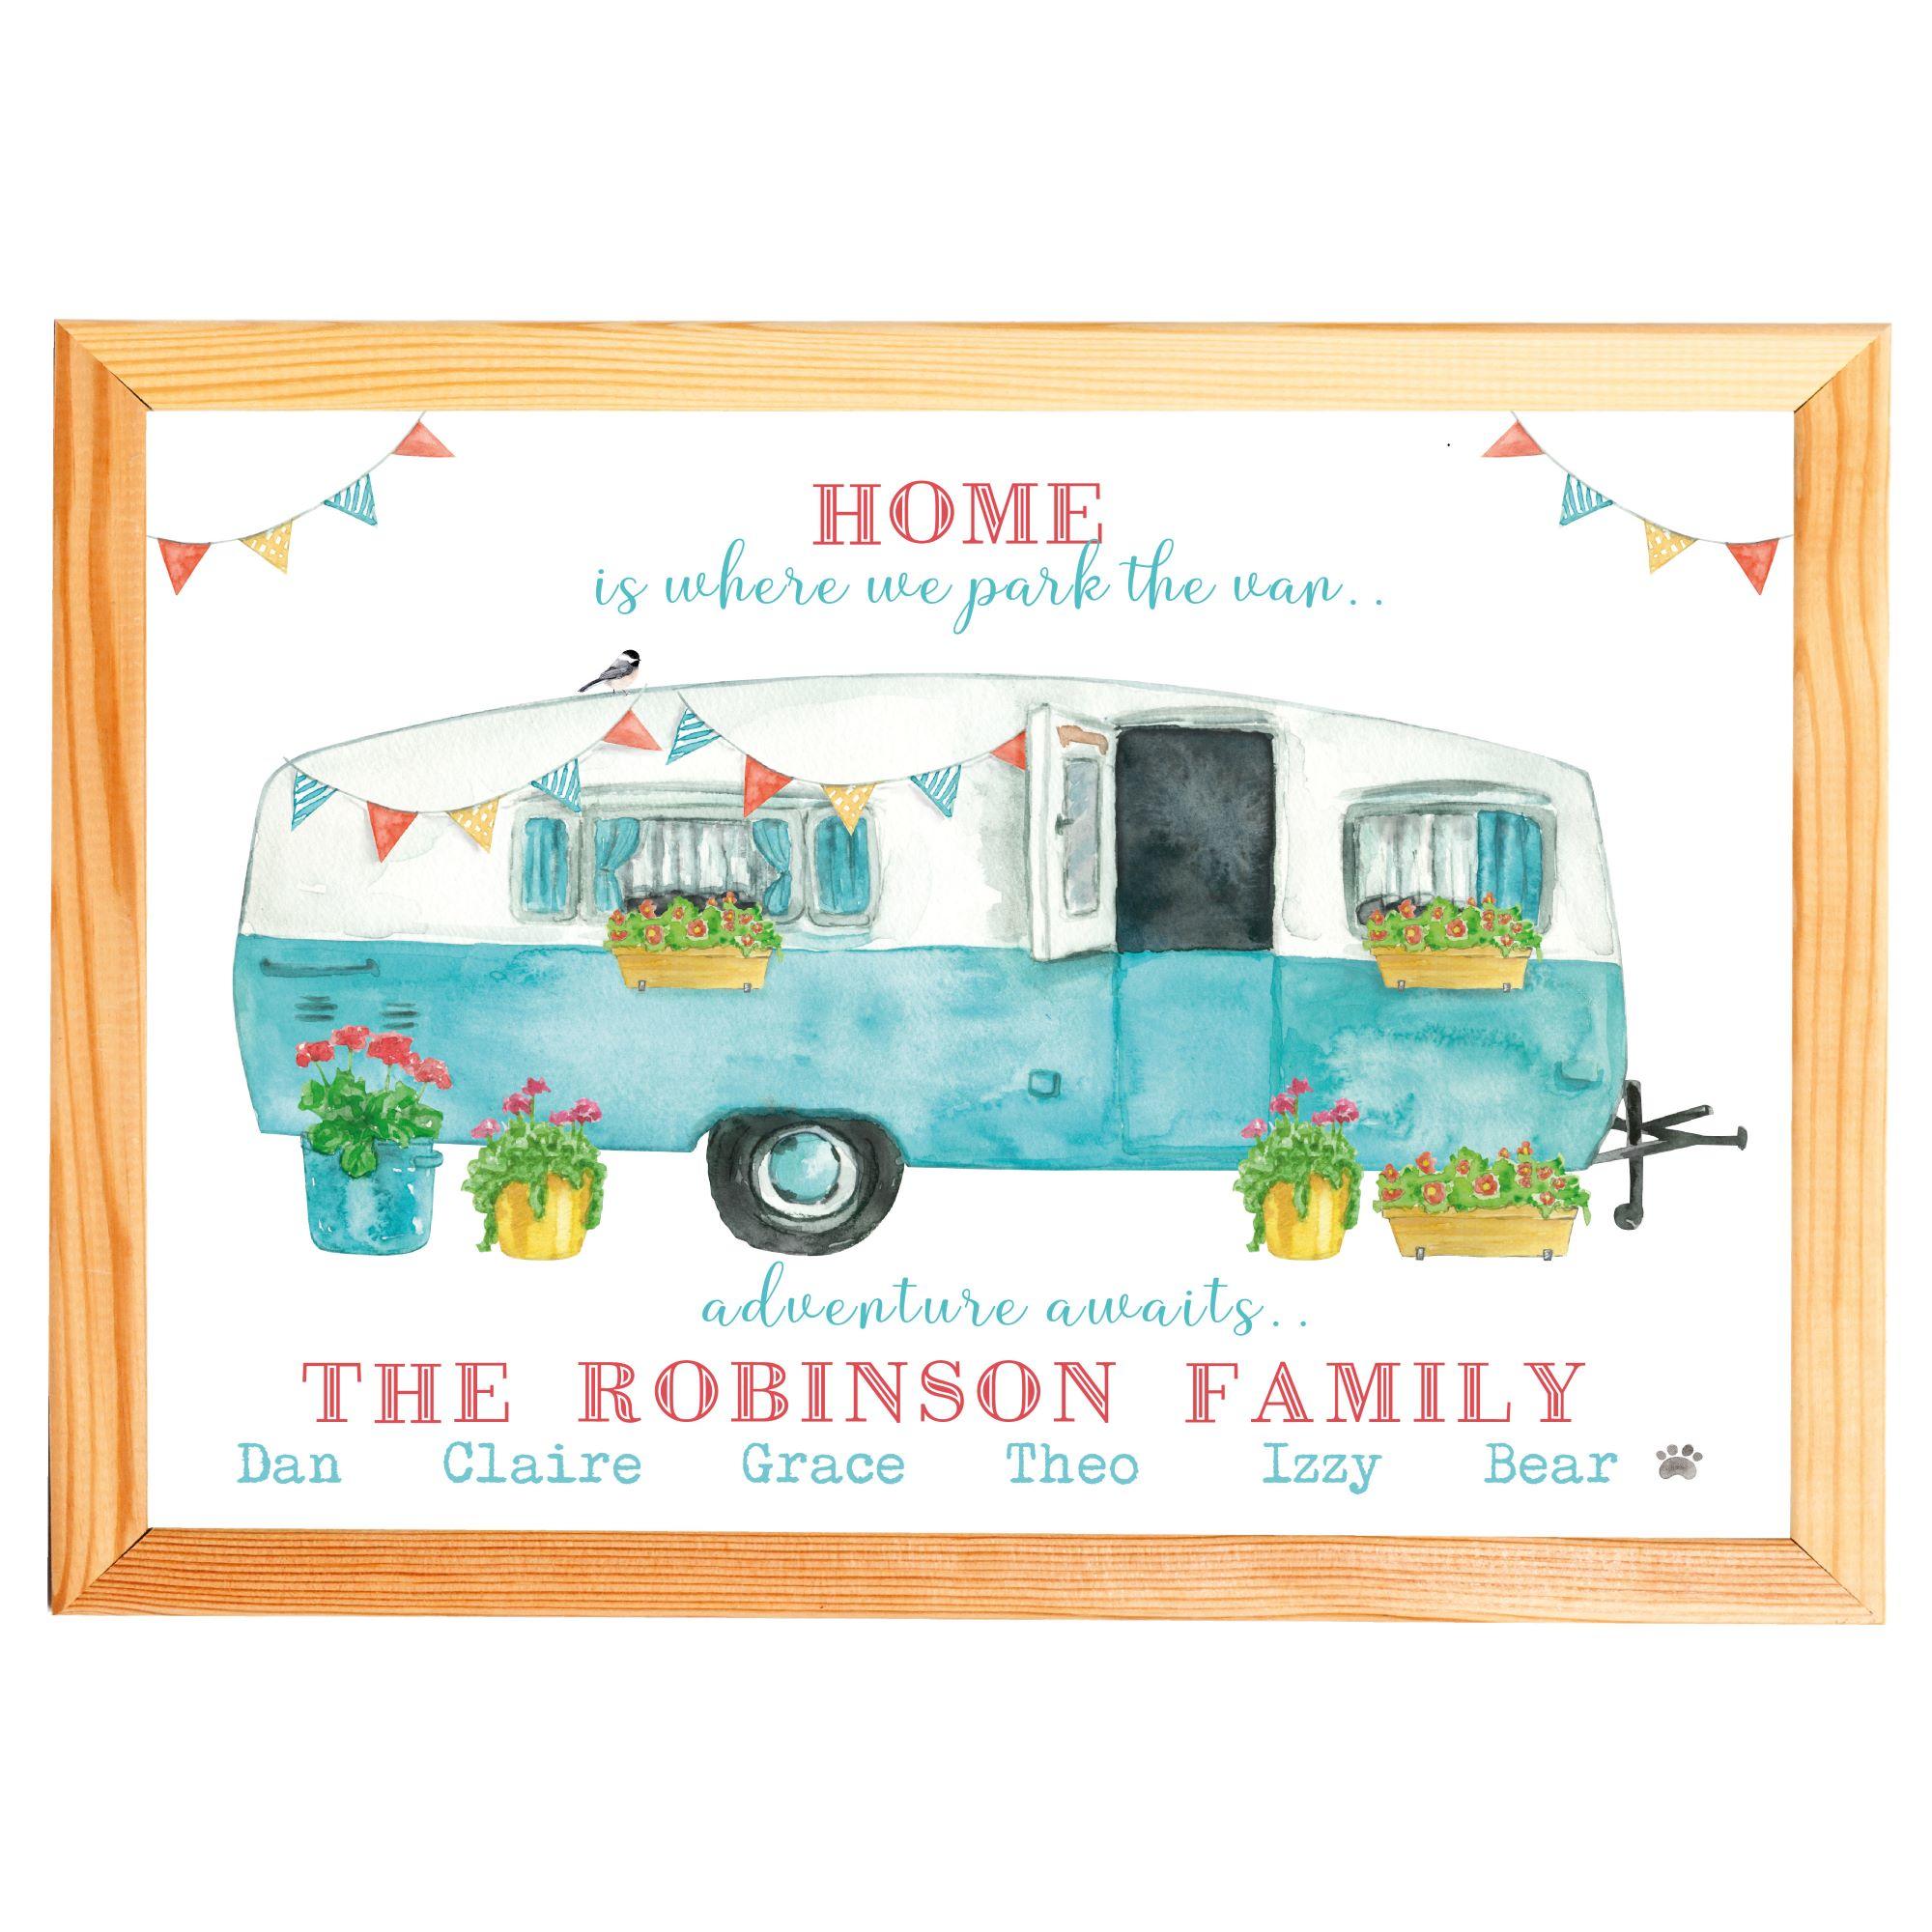 Retro Caravan Print, Picture,Personalised With Names of Family and Pets,Summer Holidays,Caravanning